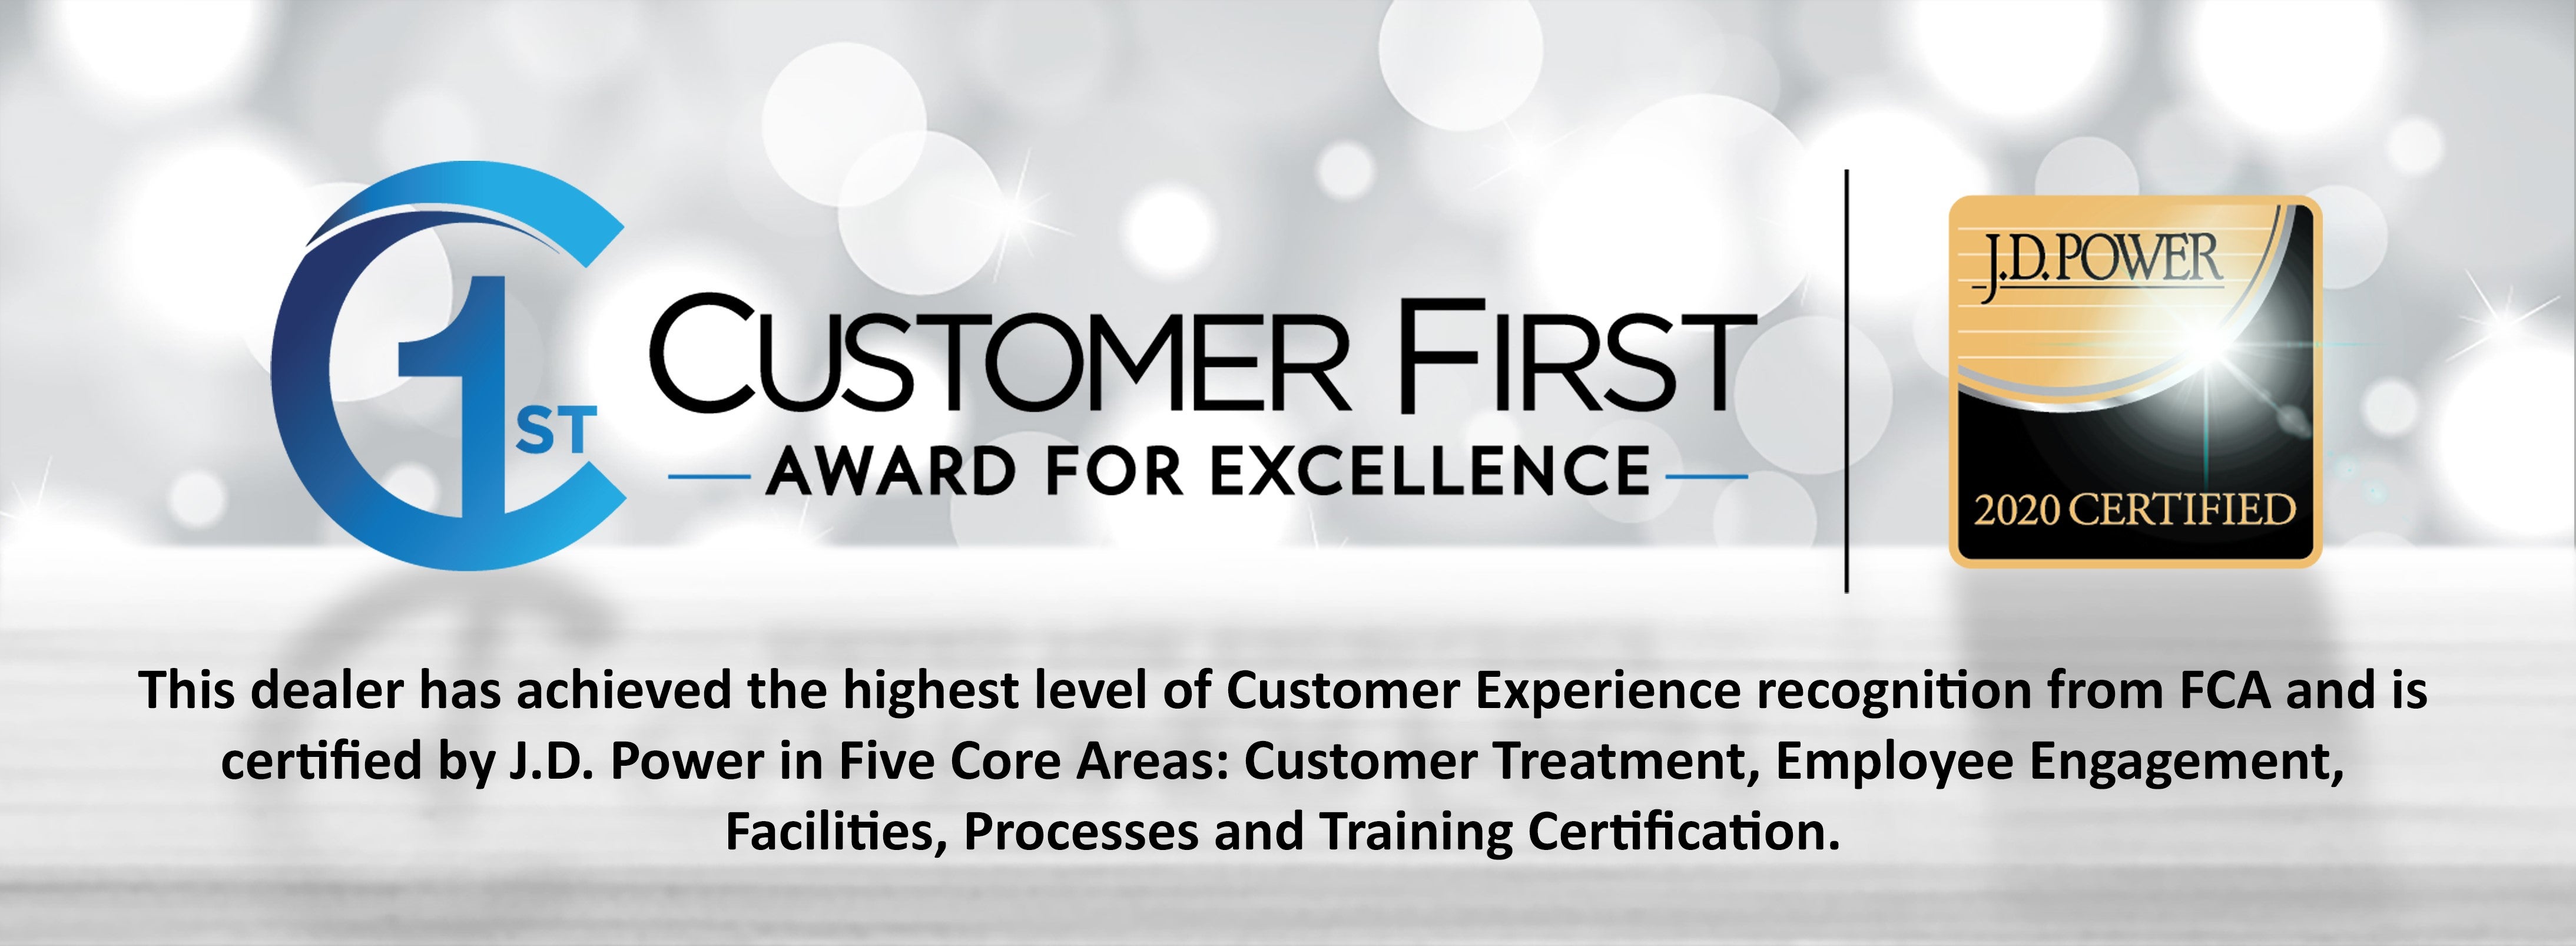 Customer First Award for Excellence for 2019 at Acra Automotive Chrysler Dodge Jeep Ram in Greensburg, IN